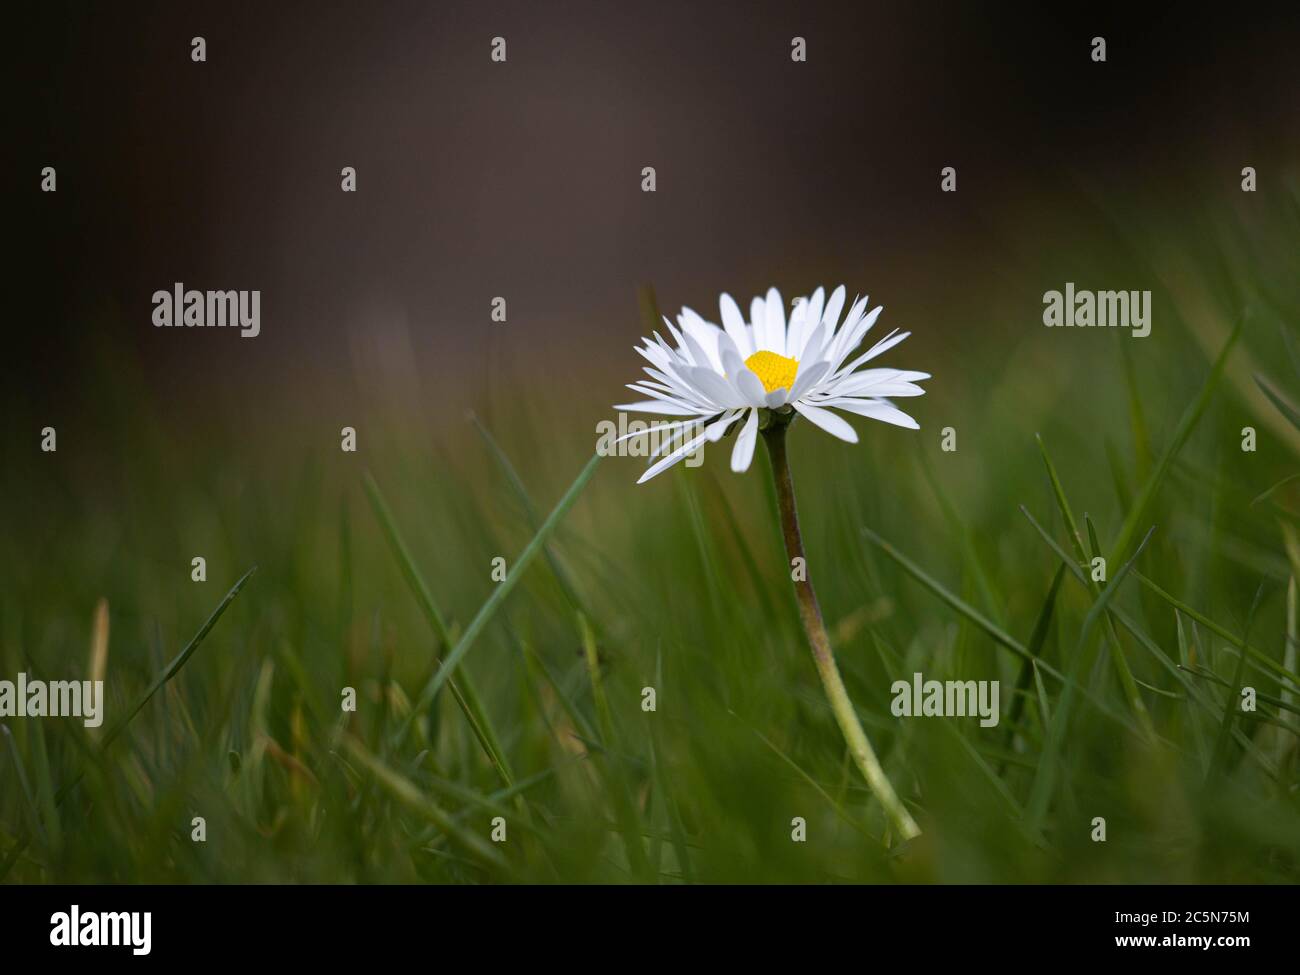 A Daisy in a field of grass Stock Photo